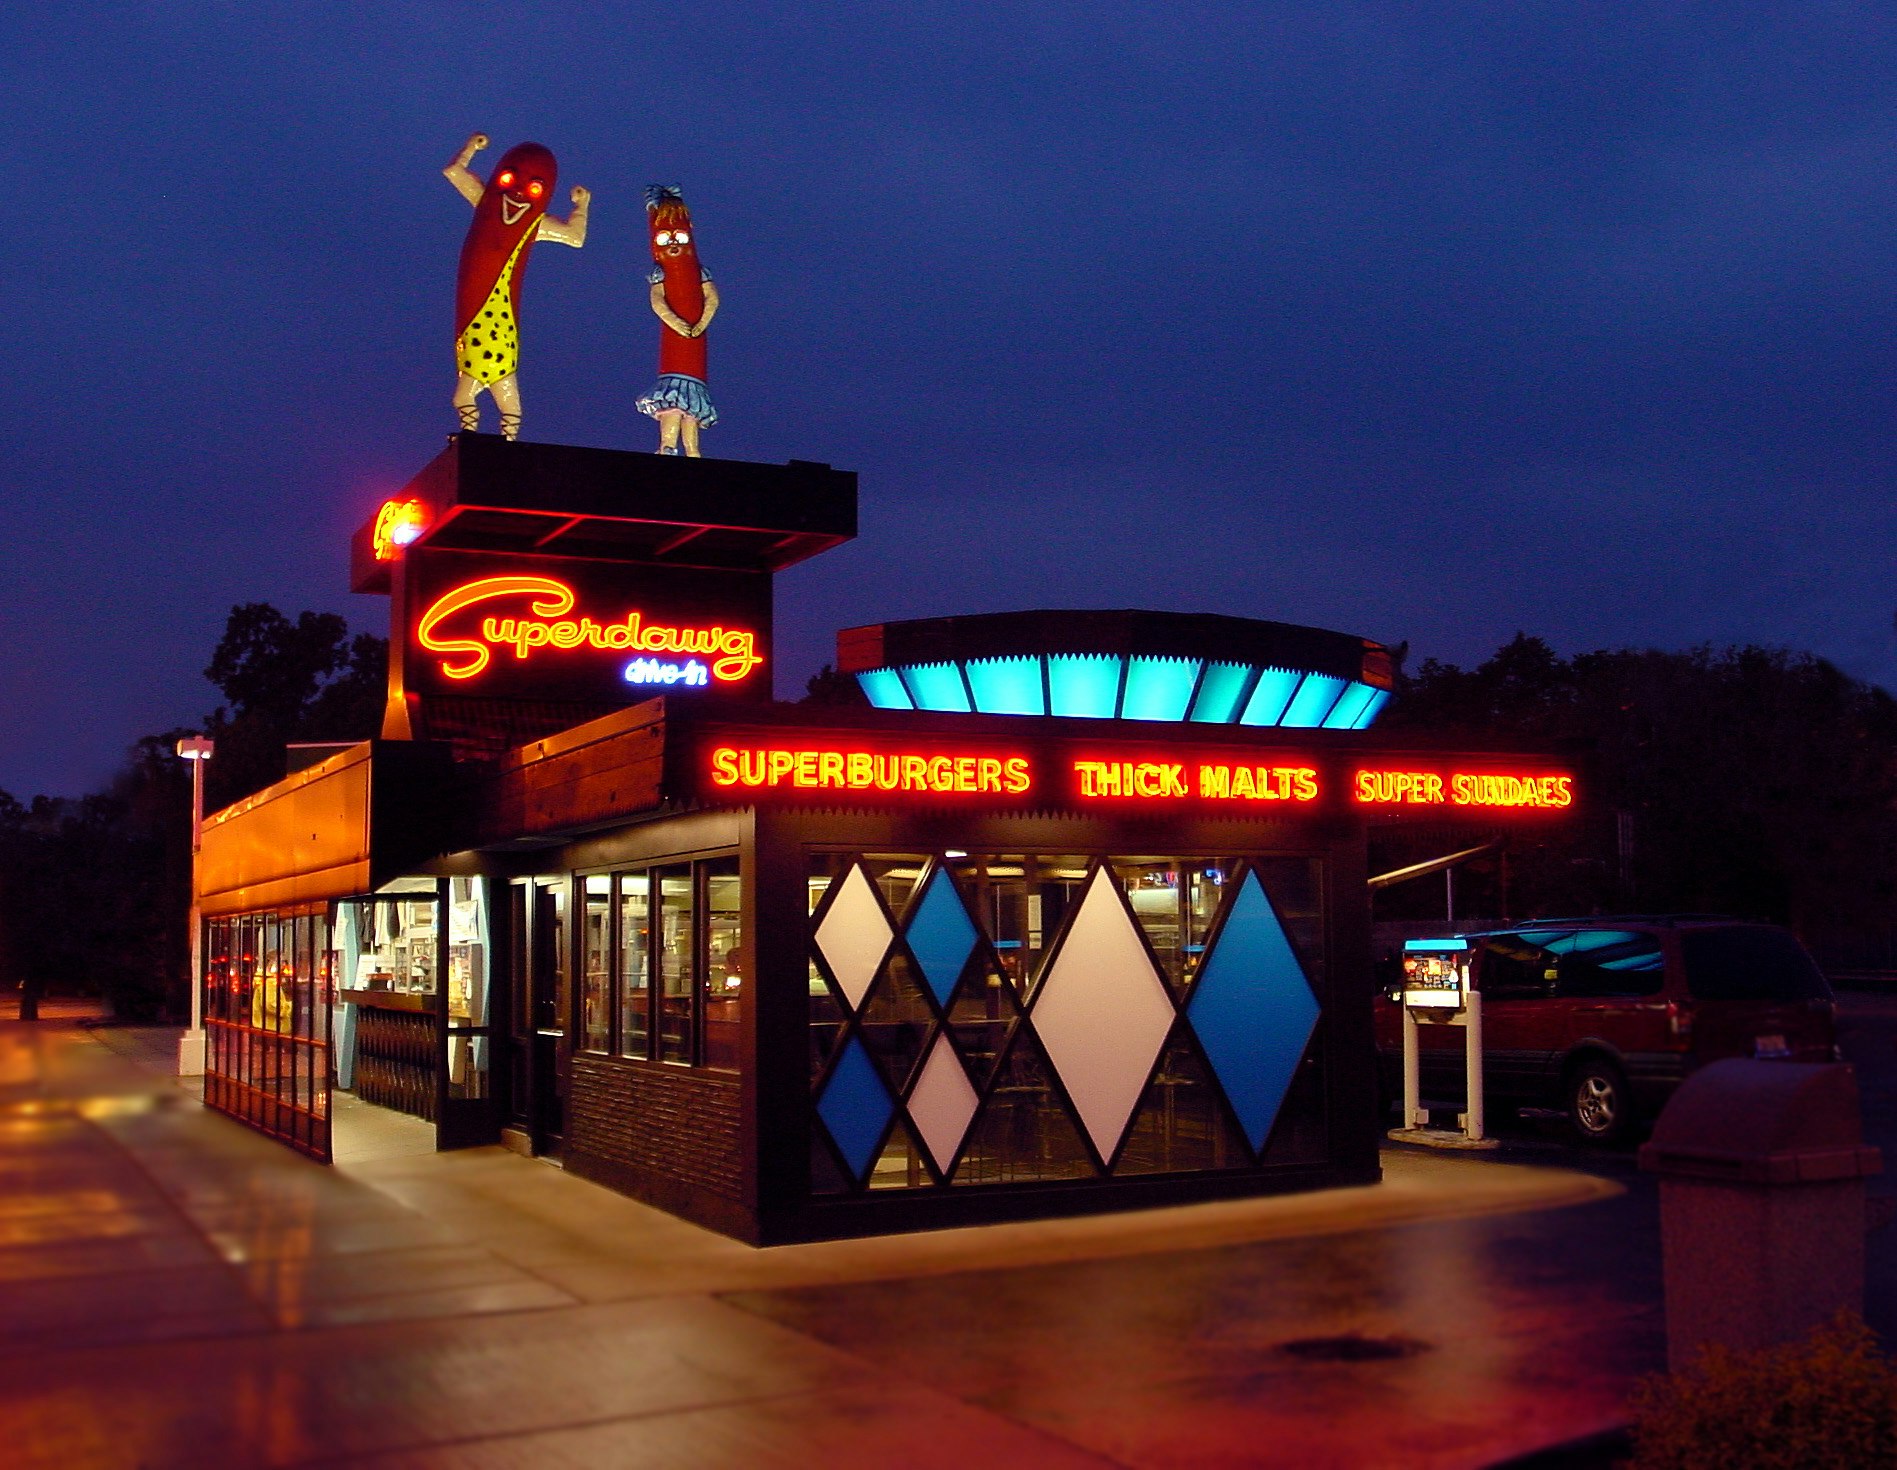 Night time photo of the exterior of the SuperDawg Drive-In. At the top of the restaurant roof is a pair of large fiberglass hot dogs